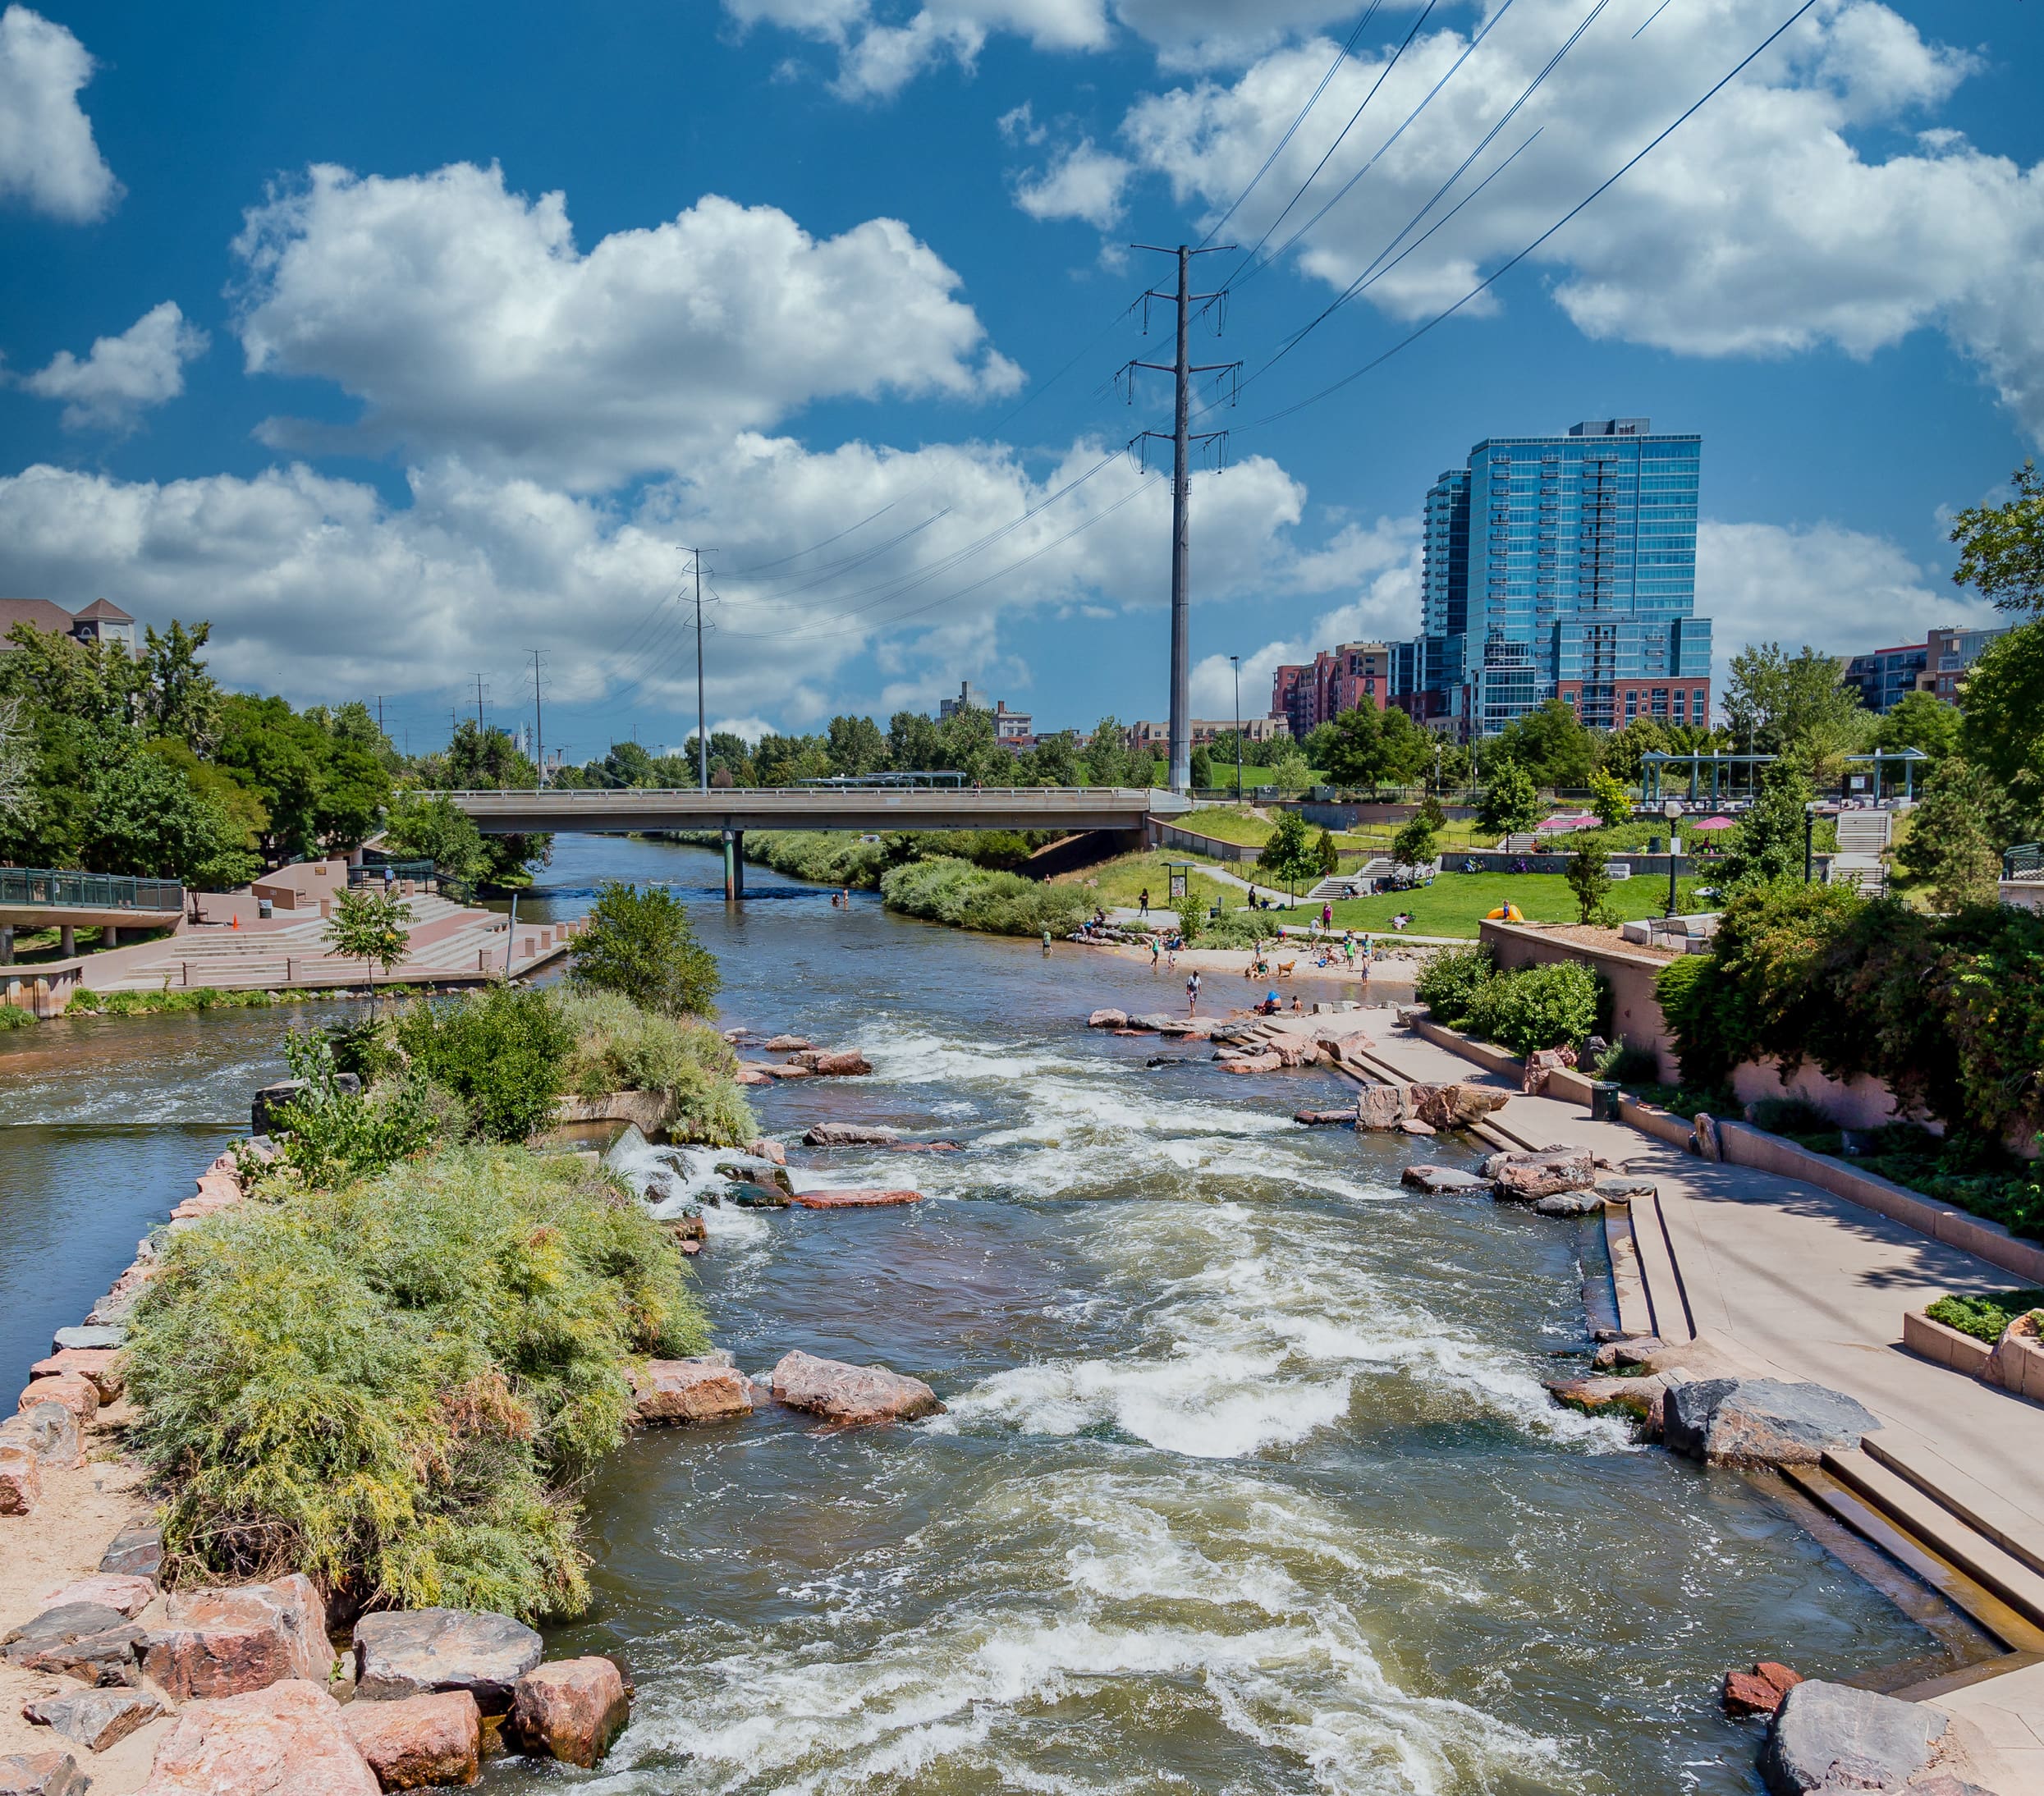 Photo of people playing in the Platte River in Denver, Colorado.